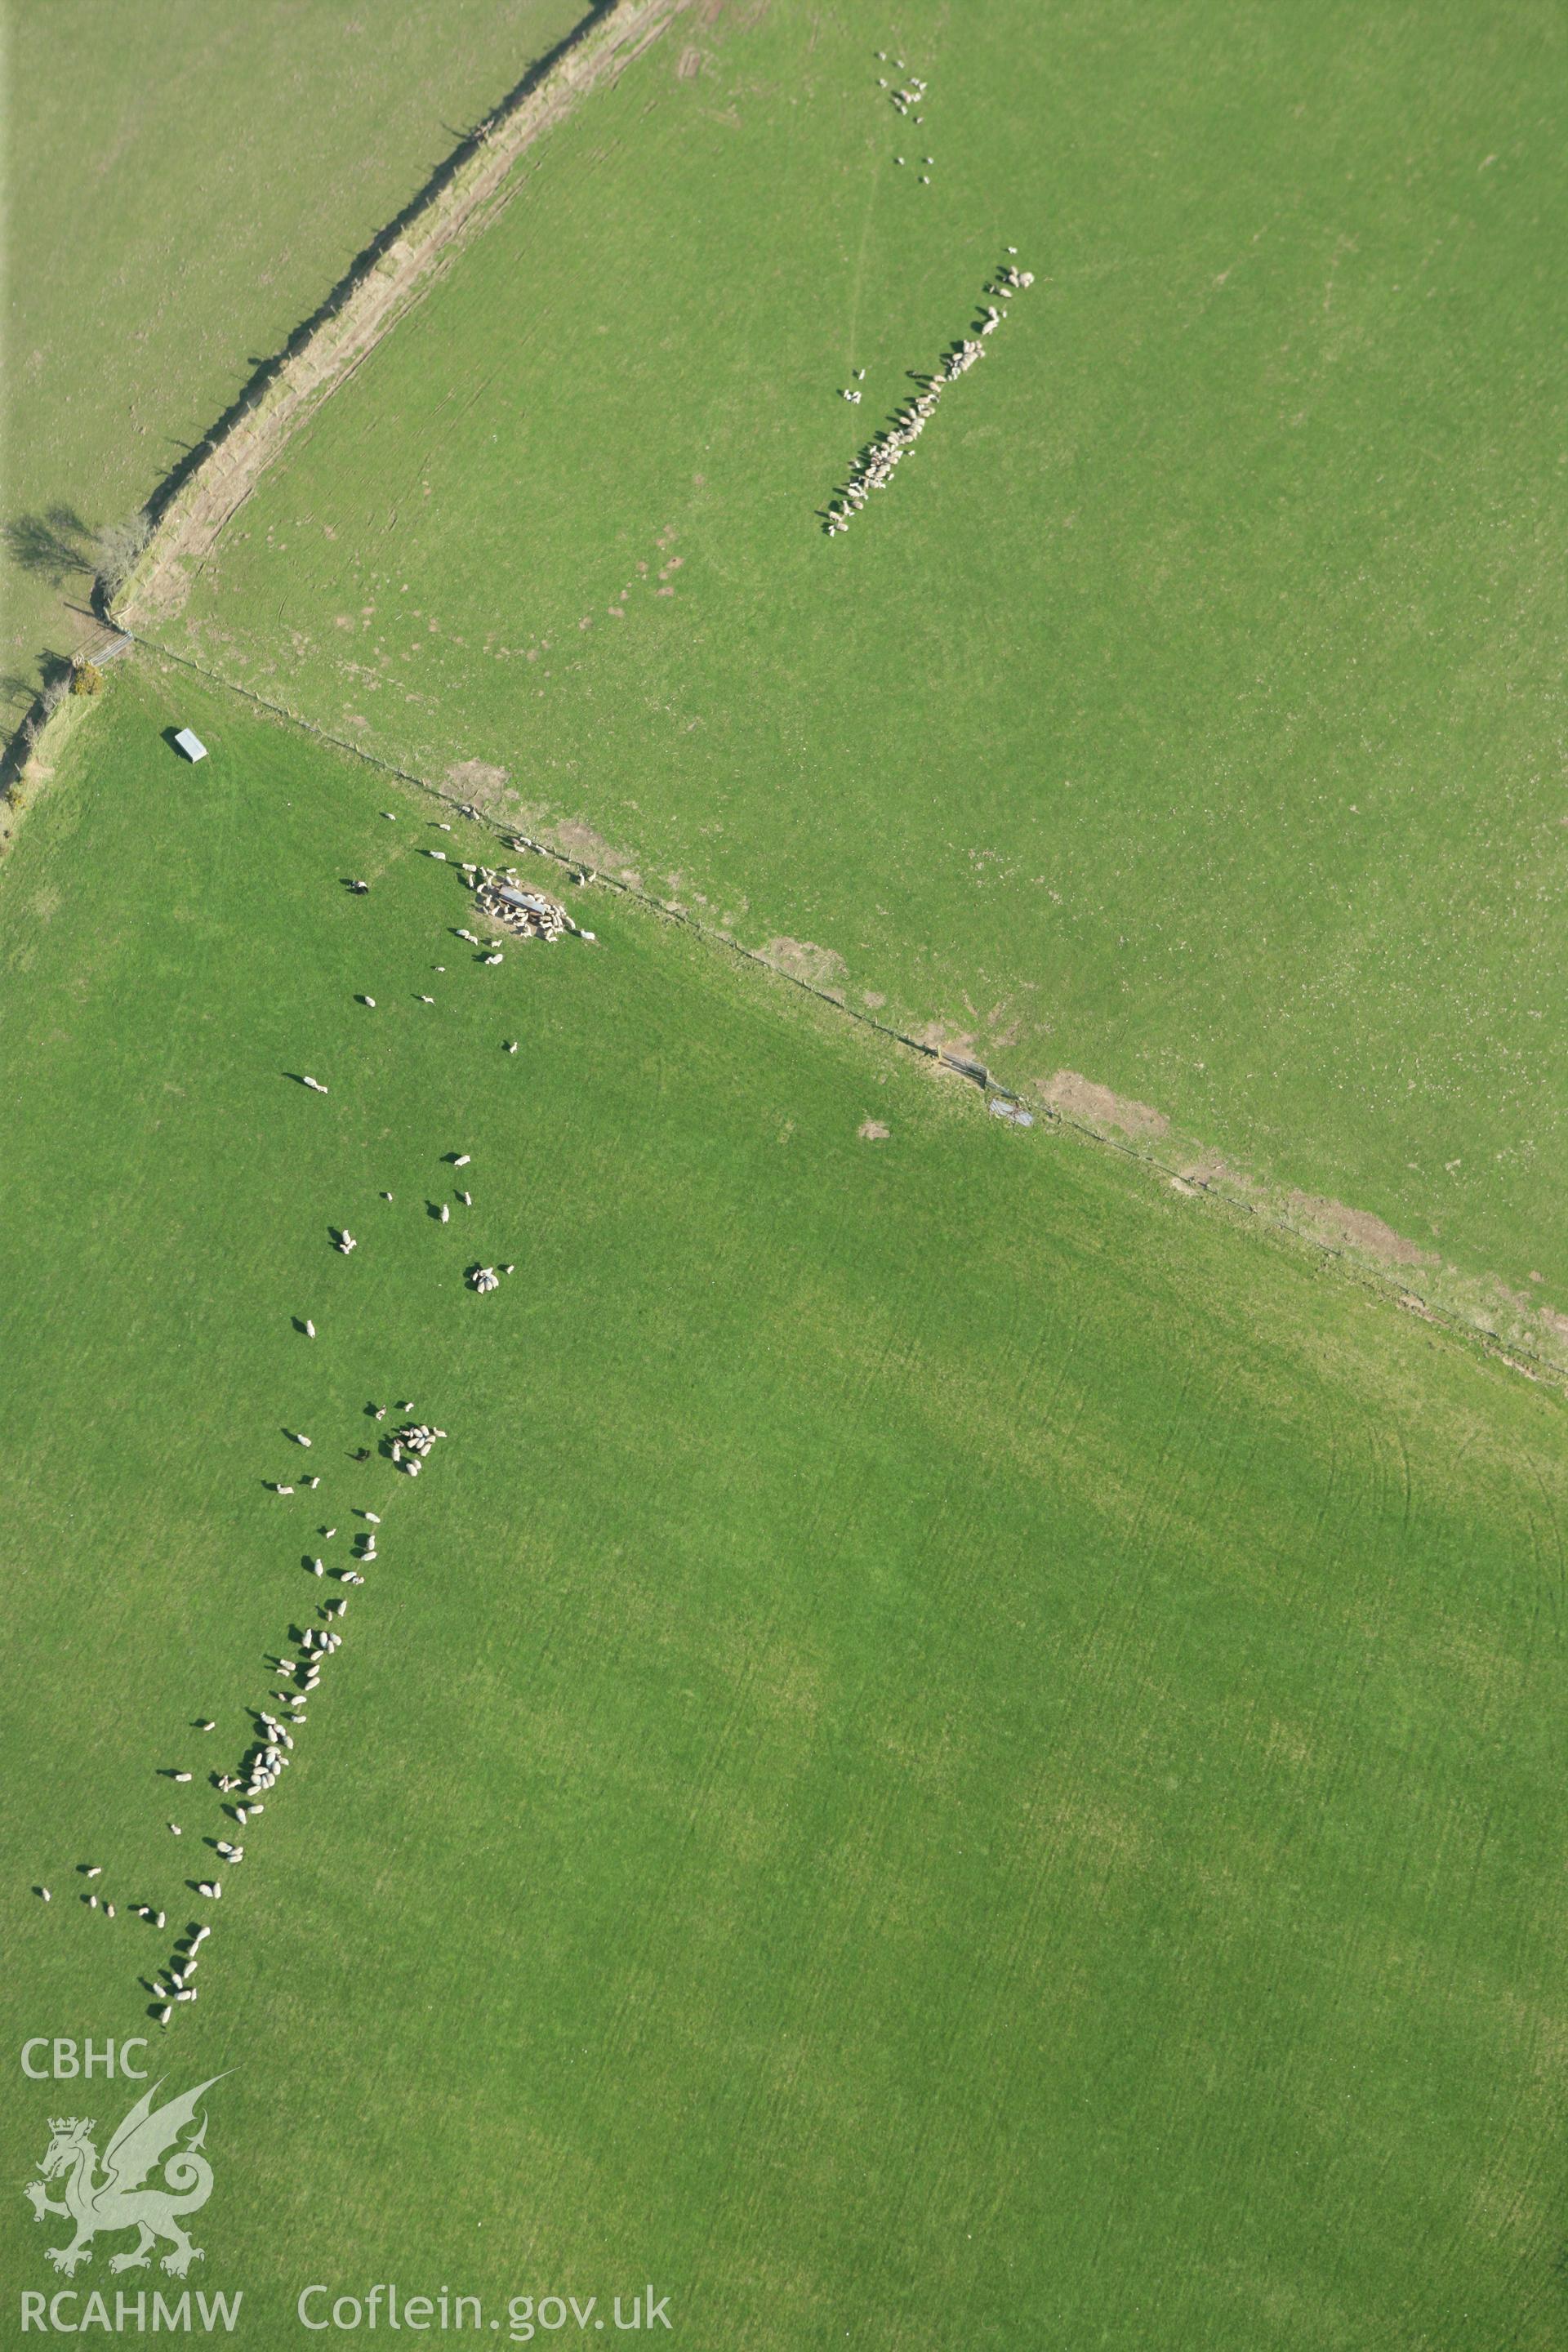 RCAHMW colour oblique aerial photograph of sheep near Cnwc. Taken on 13 April 2010 by Toby Driver